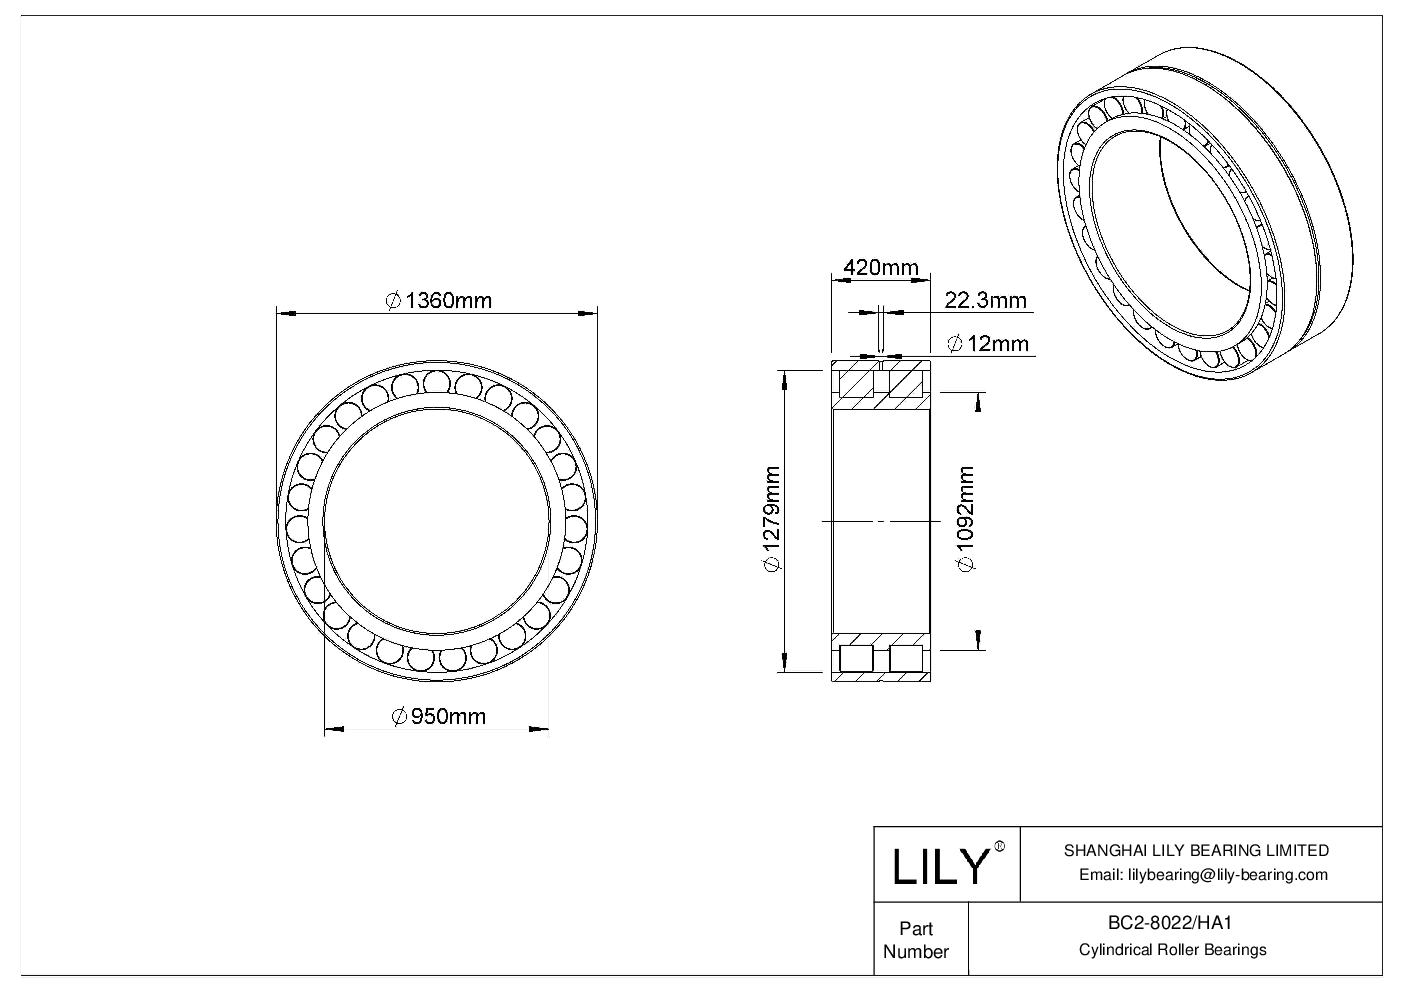 BC2-8022/HA1 Double Row Cylindrical Roller Bearings cad drawing